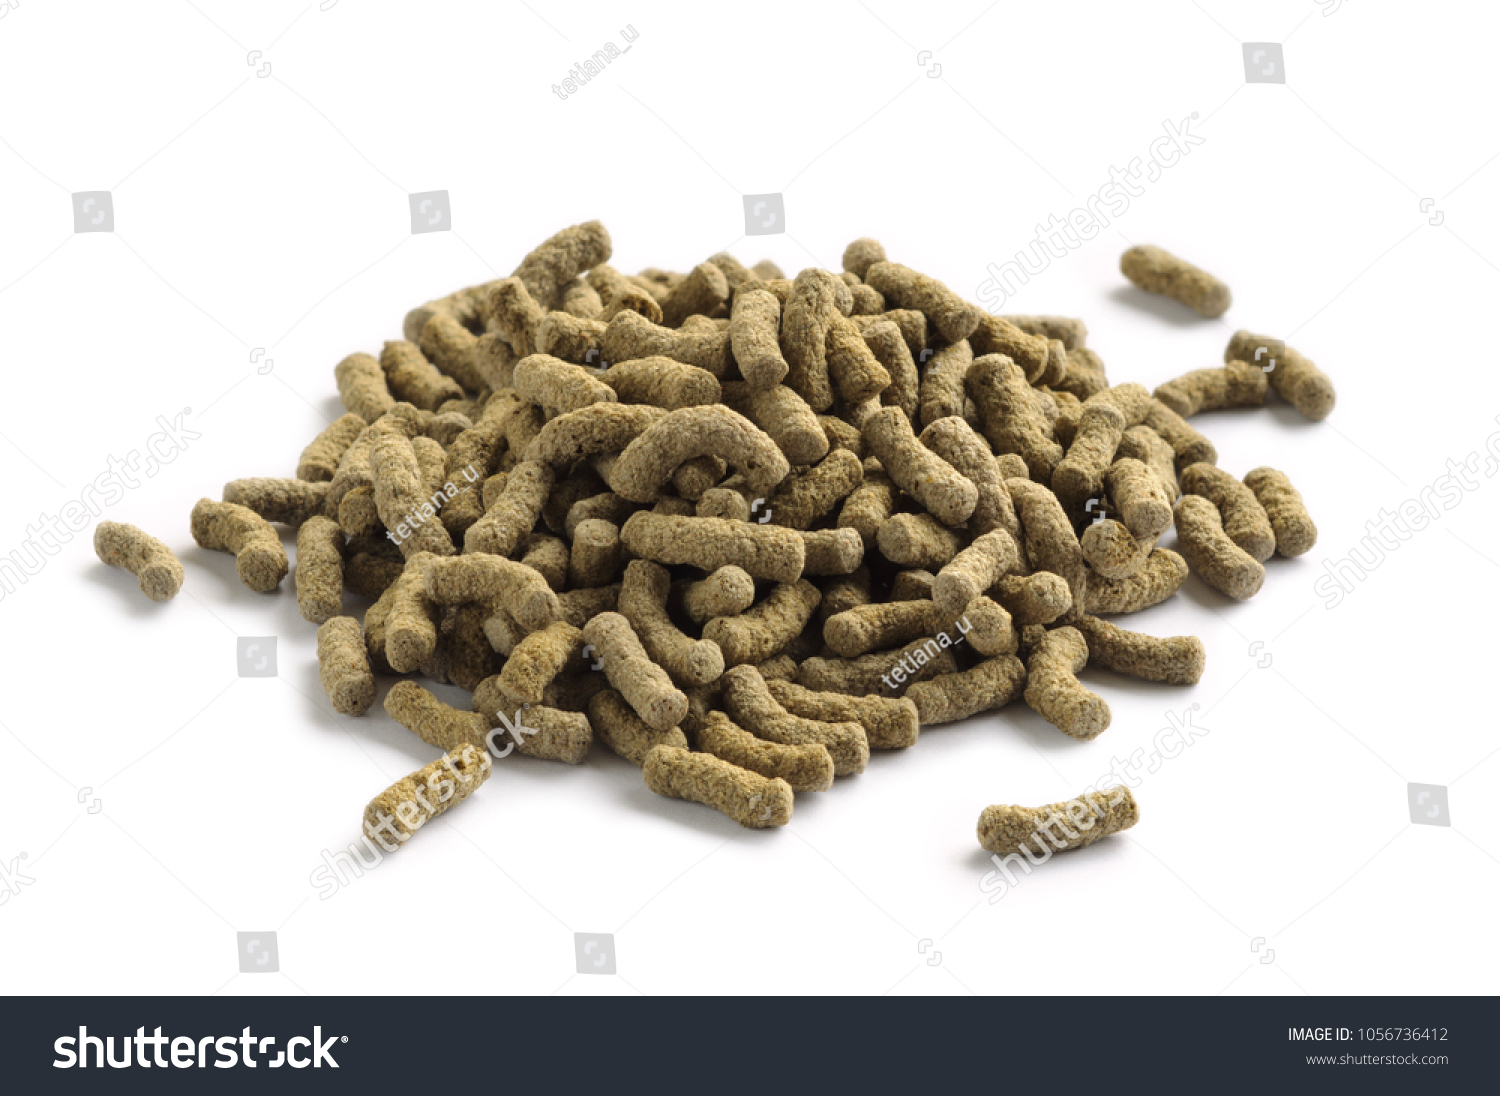 Fish feed isolated on white background. Fish food in sticks for large aquarium and pond fish #1056736412